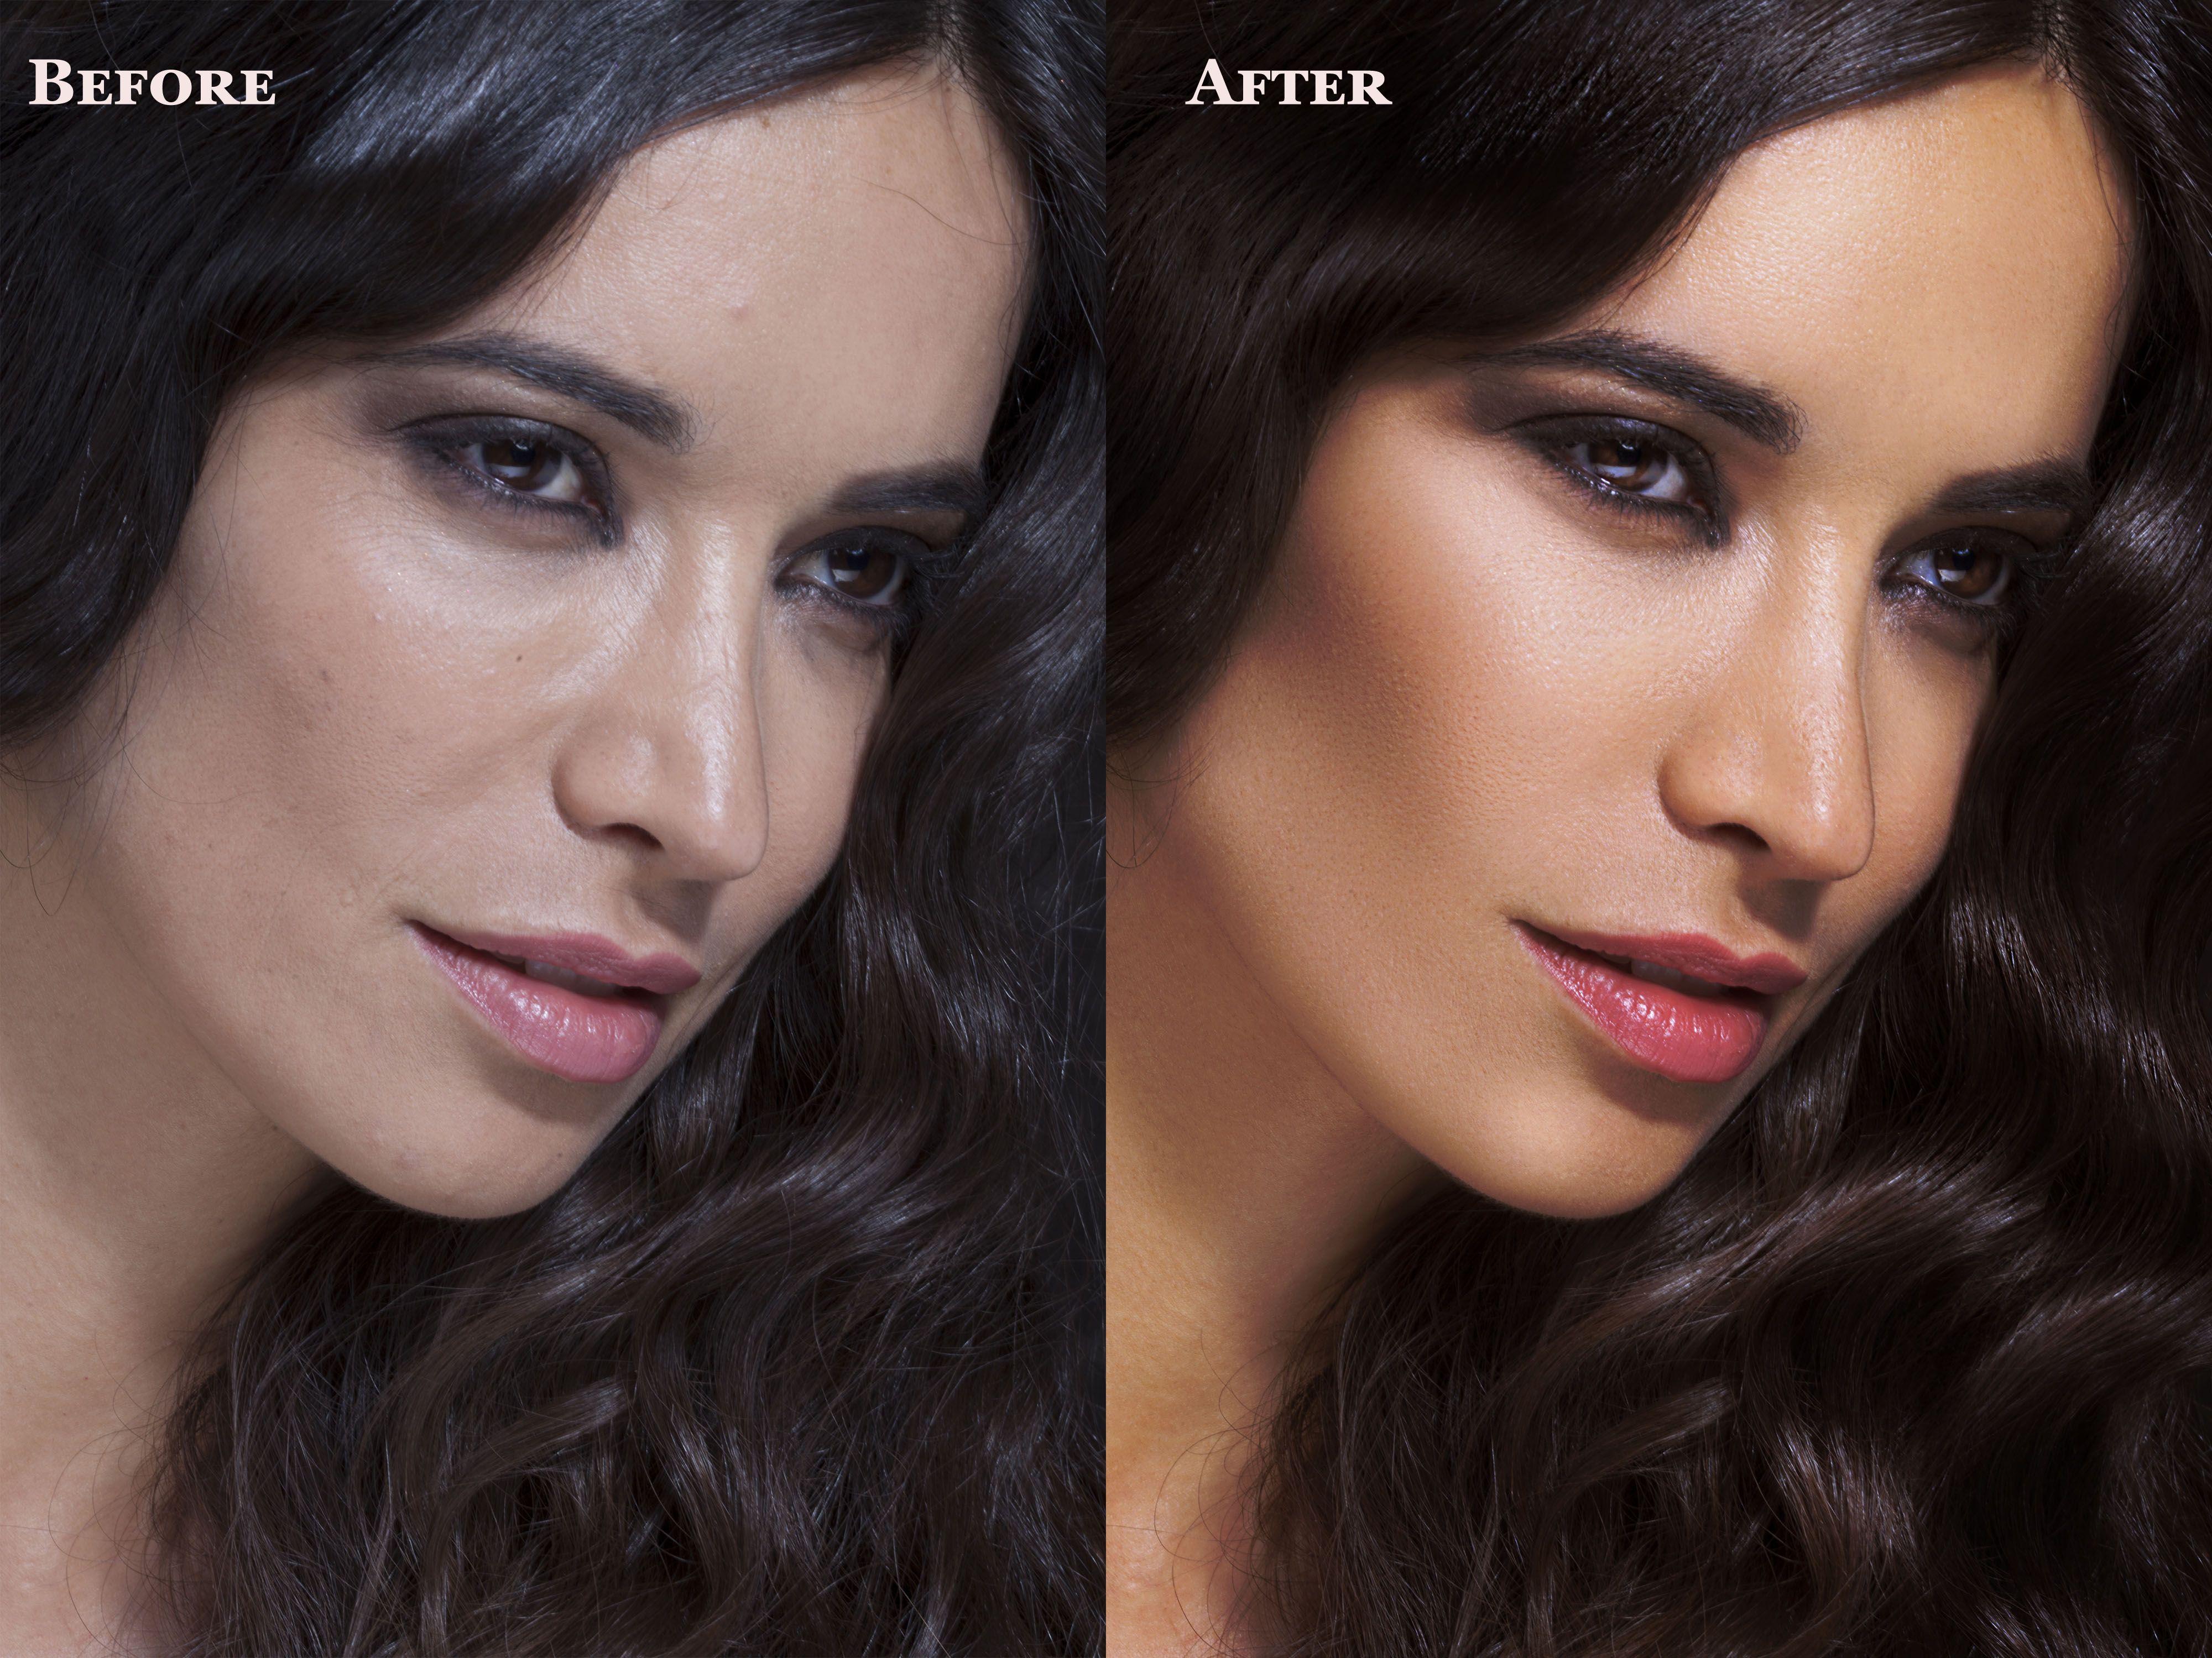 6861I will professionally edit and retouch images in photoshop